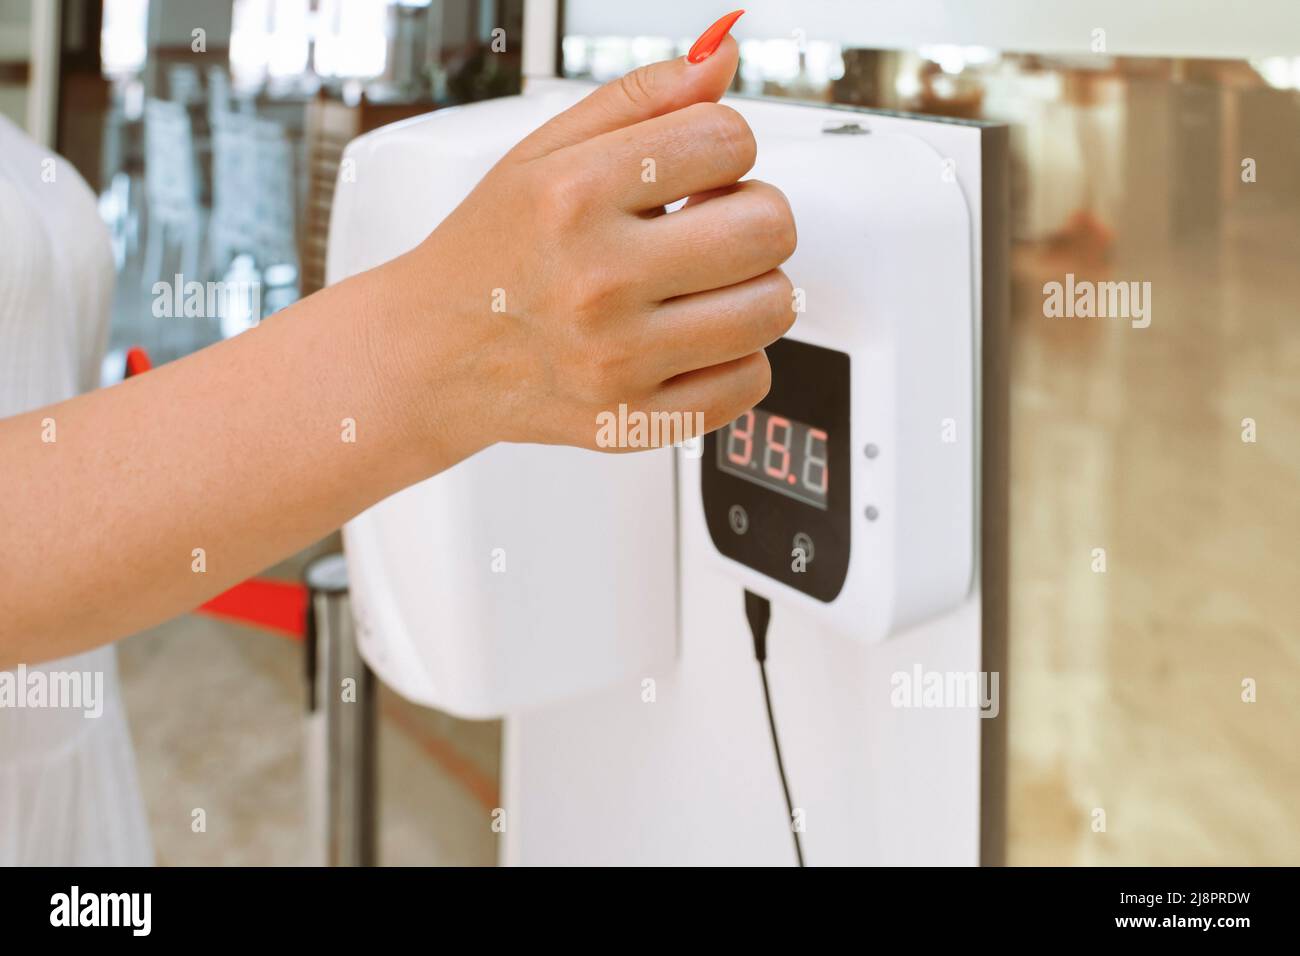 lady hand checking temperature before entering restaurant with automatic body measuring temperature check machine Stock Photo